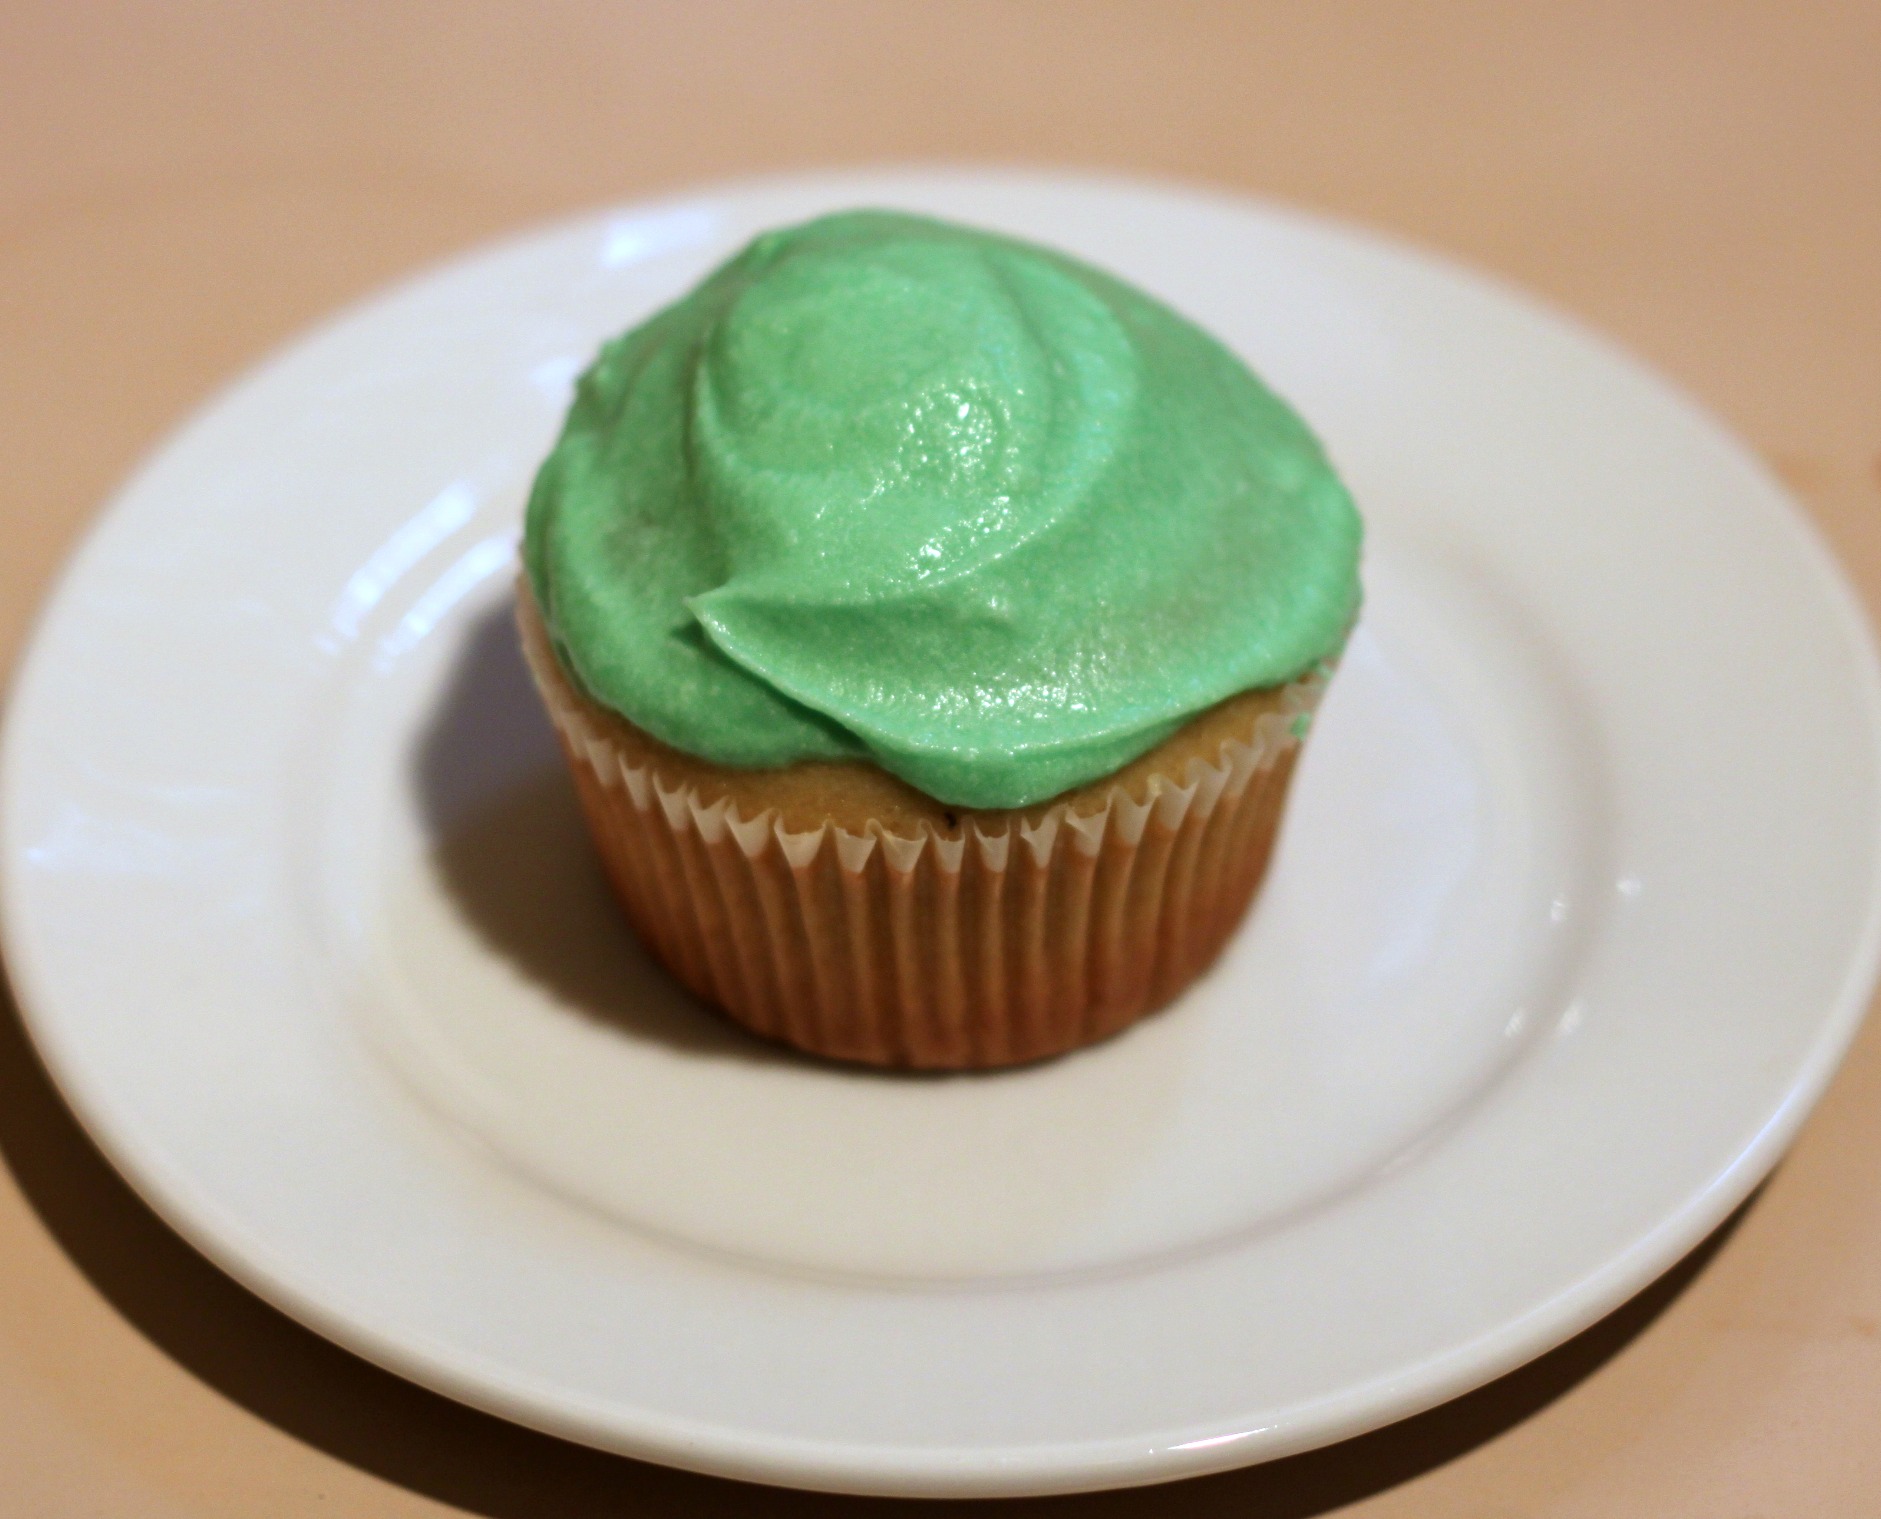 Cupcakes with green frosting